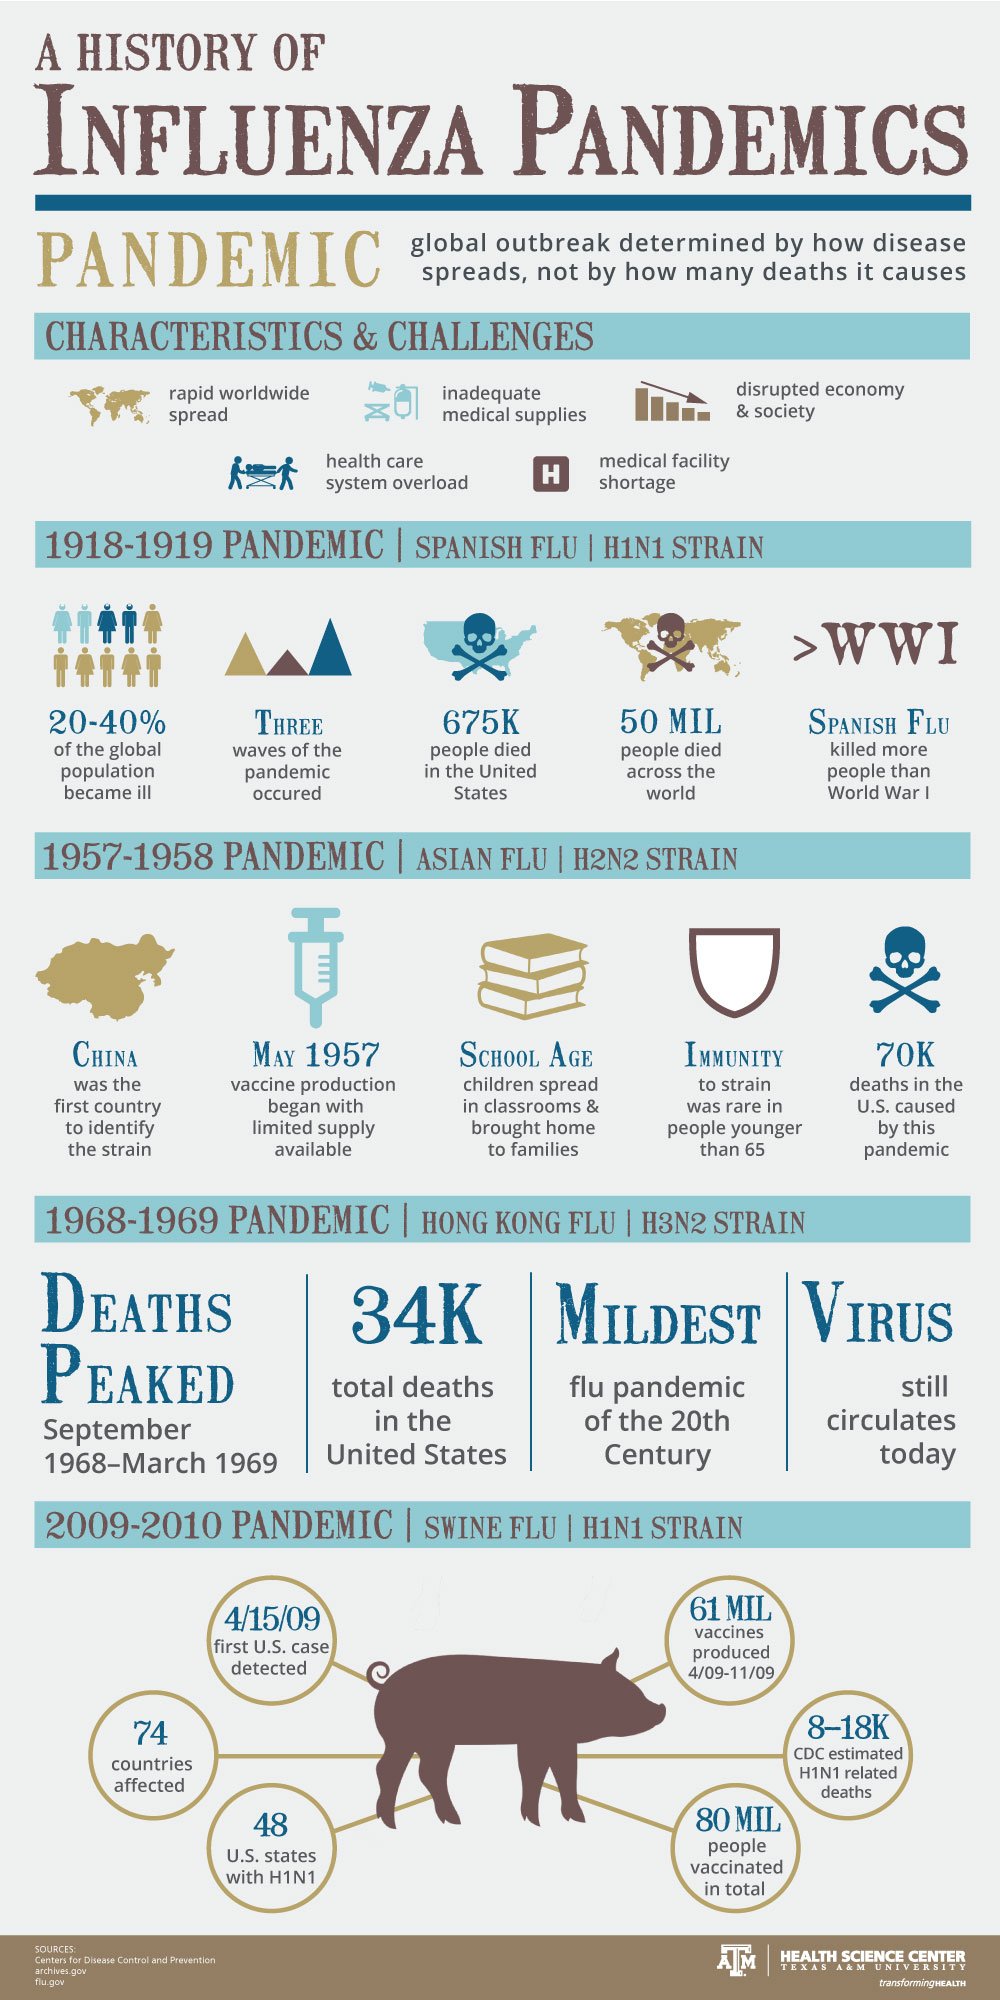 Infographic about the major flu pandemics , including the 1918-1919 pandemic, the 1957*1958 pandemic, the 1968-1969 pandemic and the 2009-2010 pandemic.